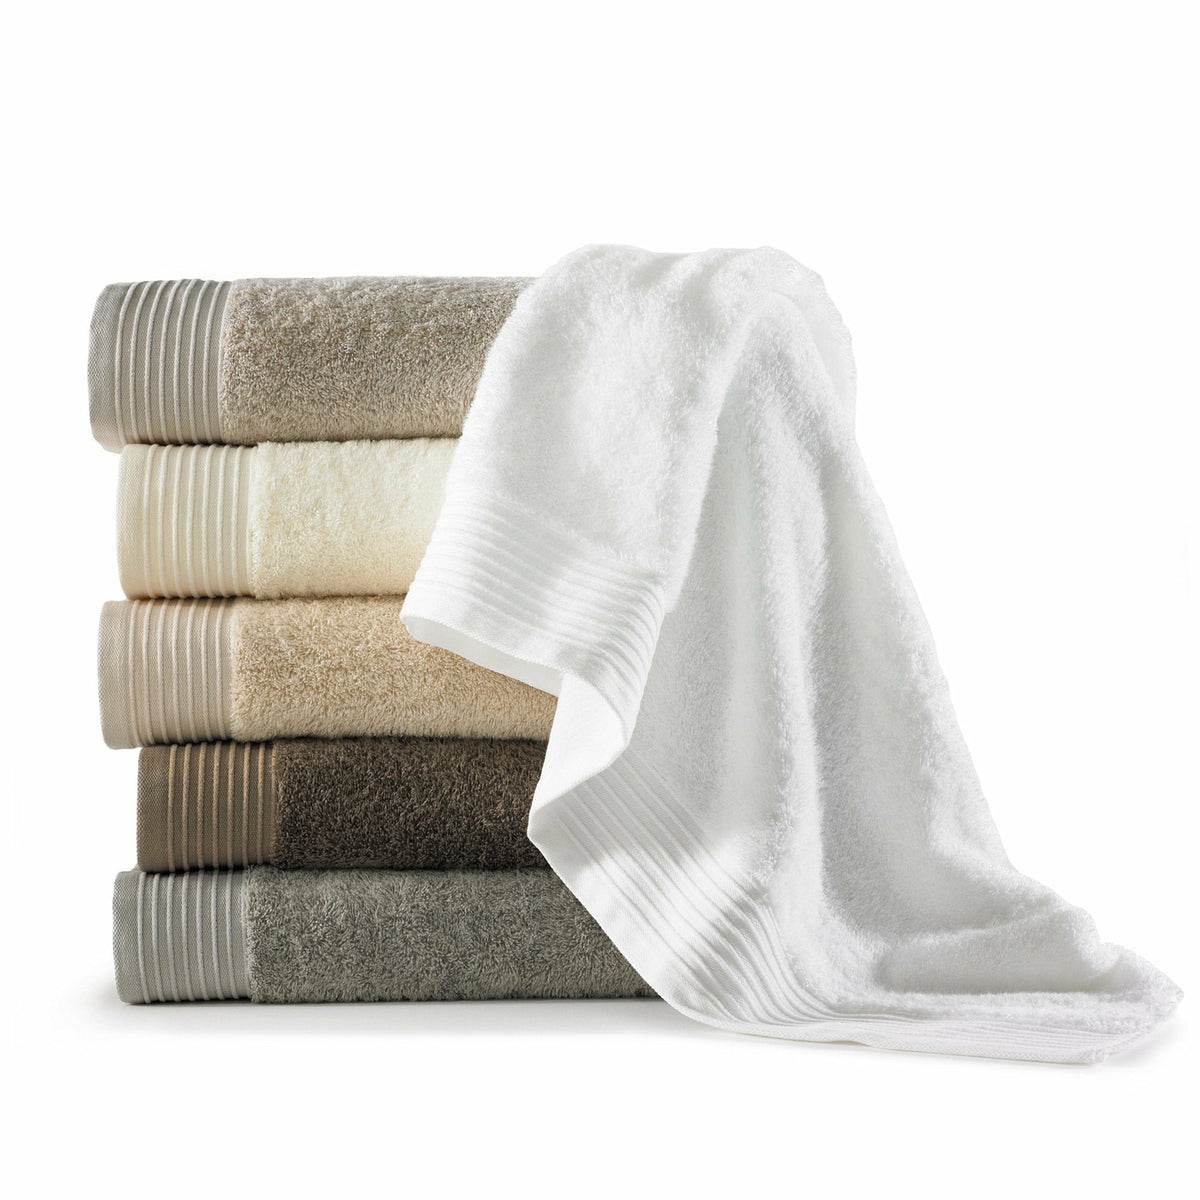 Peacock Alley Bamboo Bath Towels Stack Fine Linens